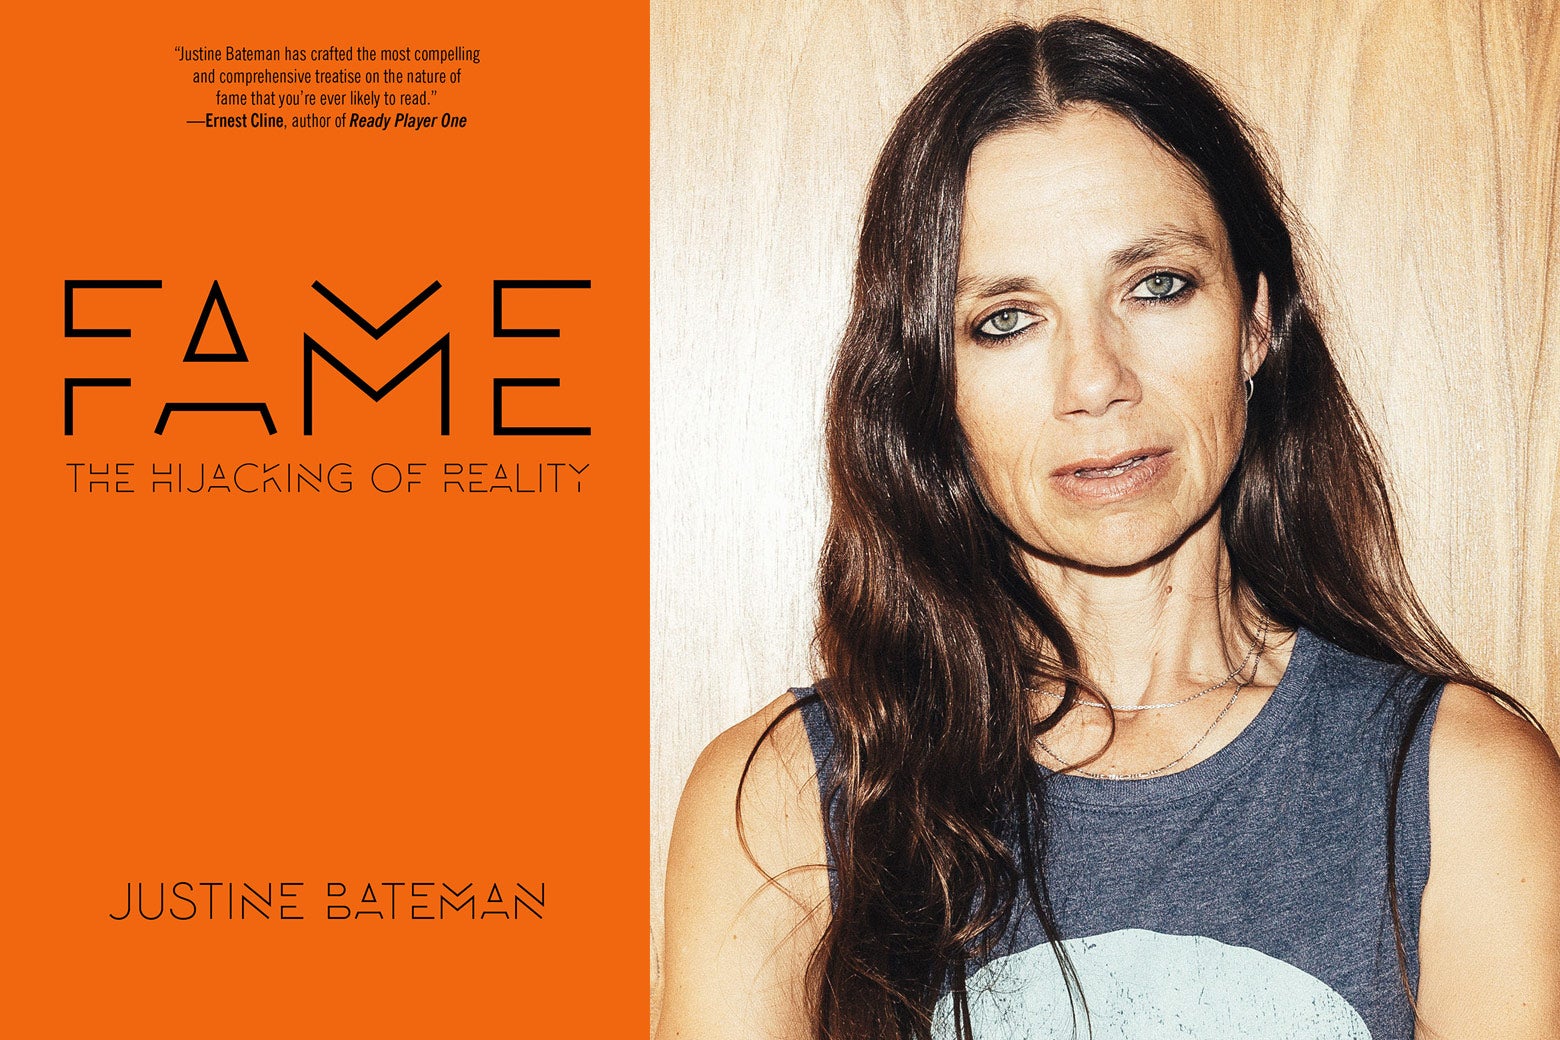 The cover of Fame: The Hijacking of Reality and a close-up of Justine Bateman, side by side.